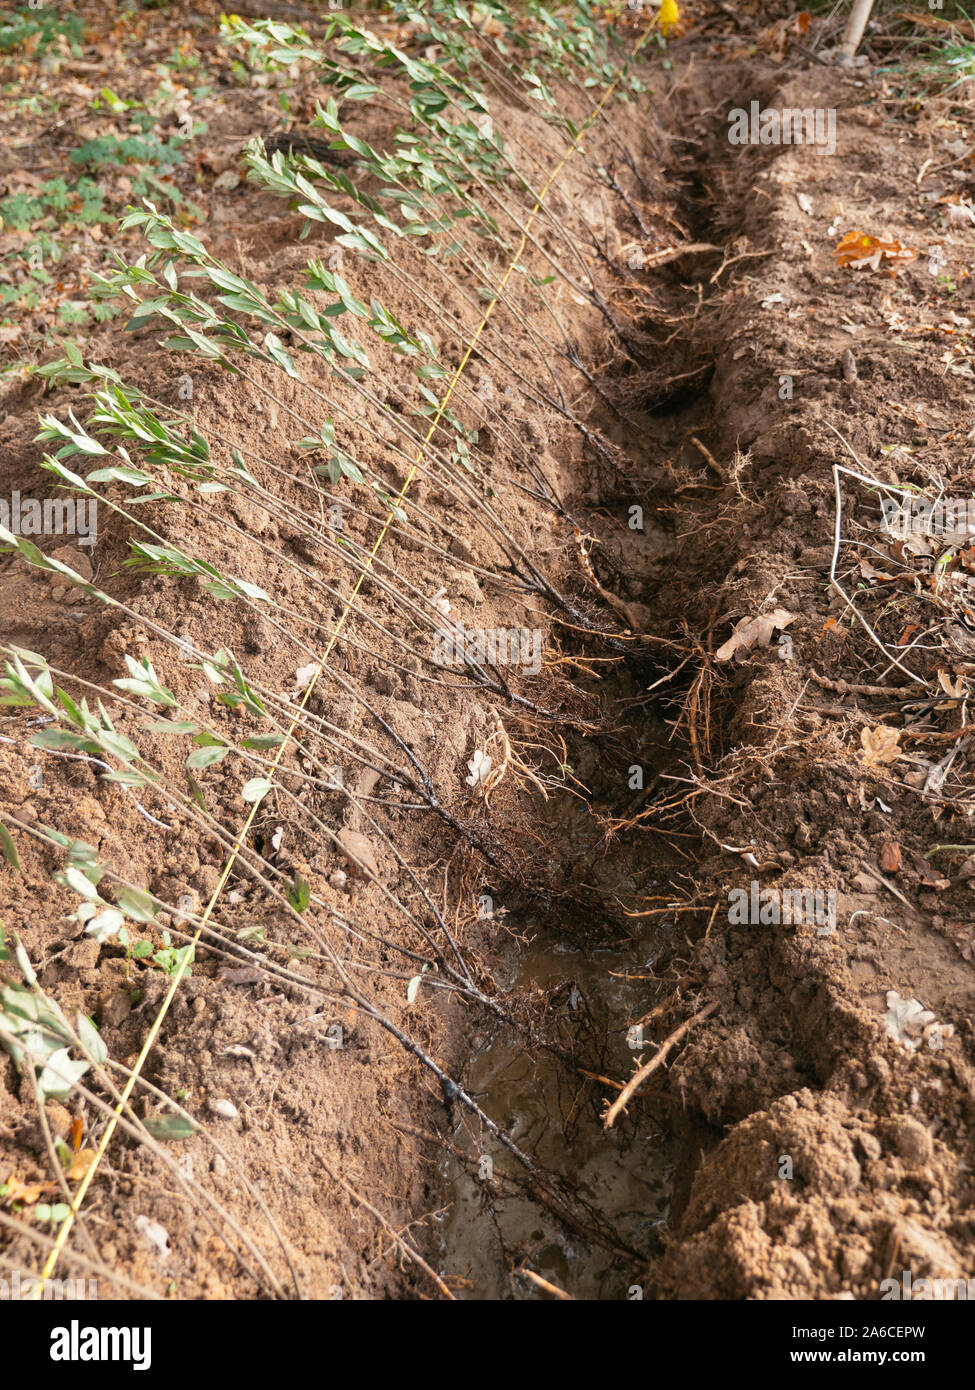 Ligustrum vulgare 'Atrovirens' plants being spaced out in a prepared trench. Stock Photo